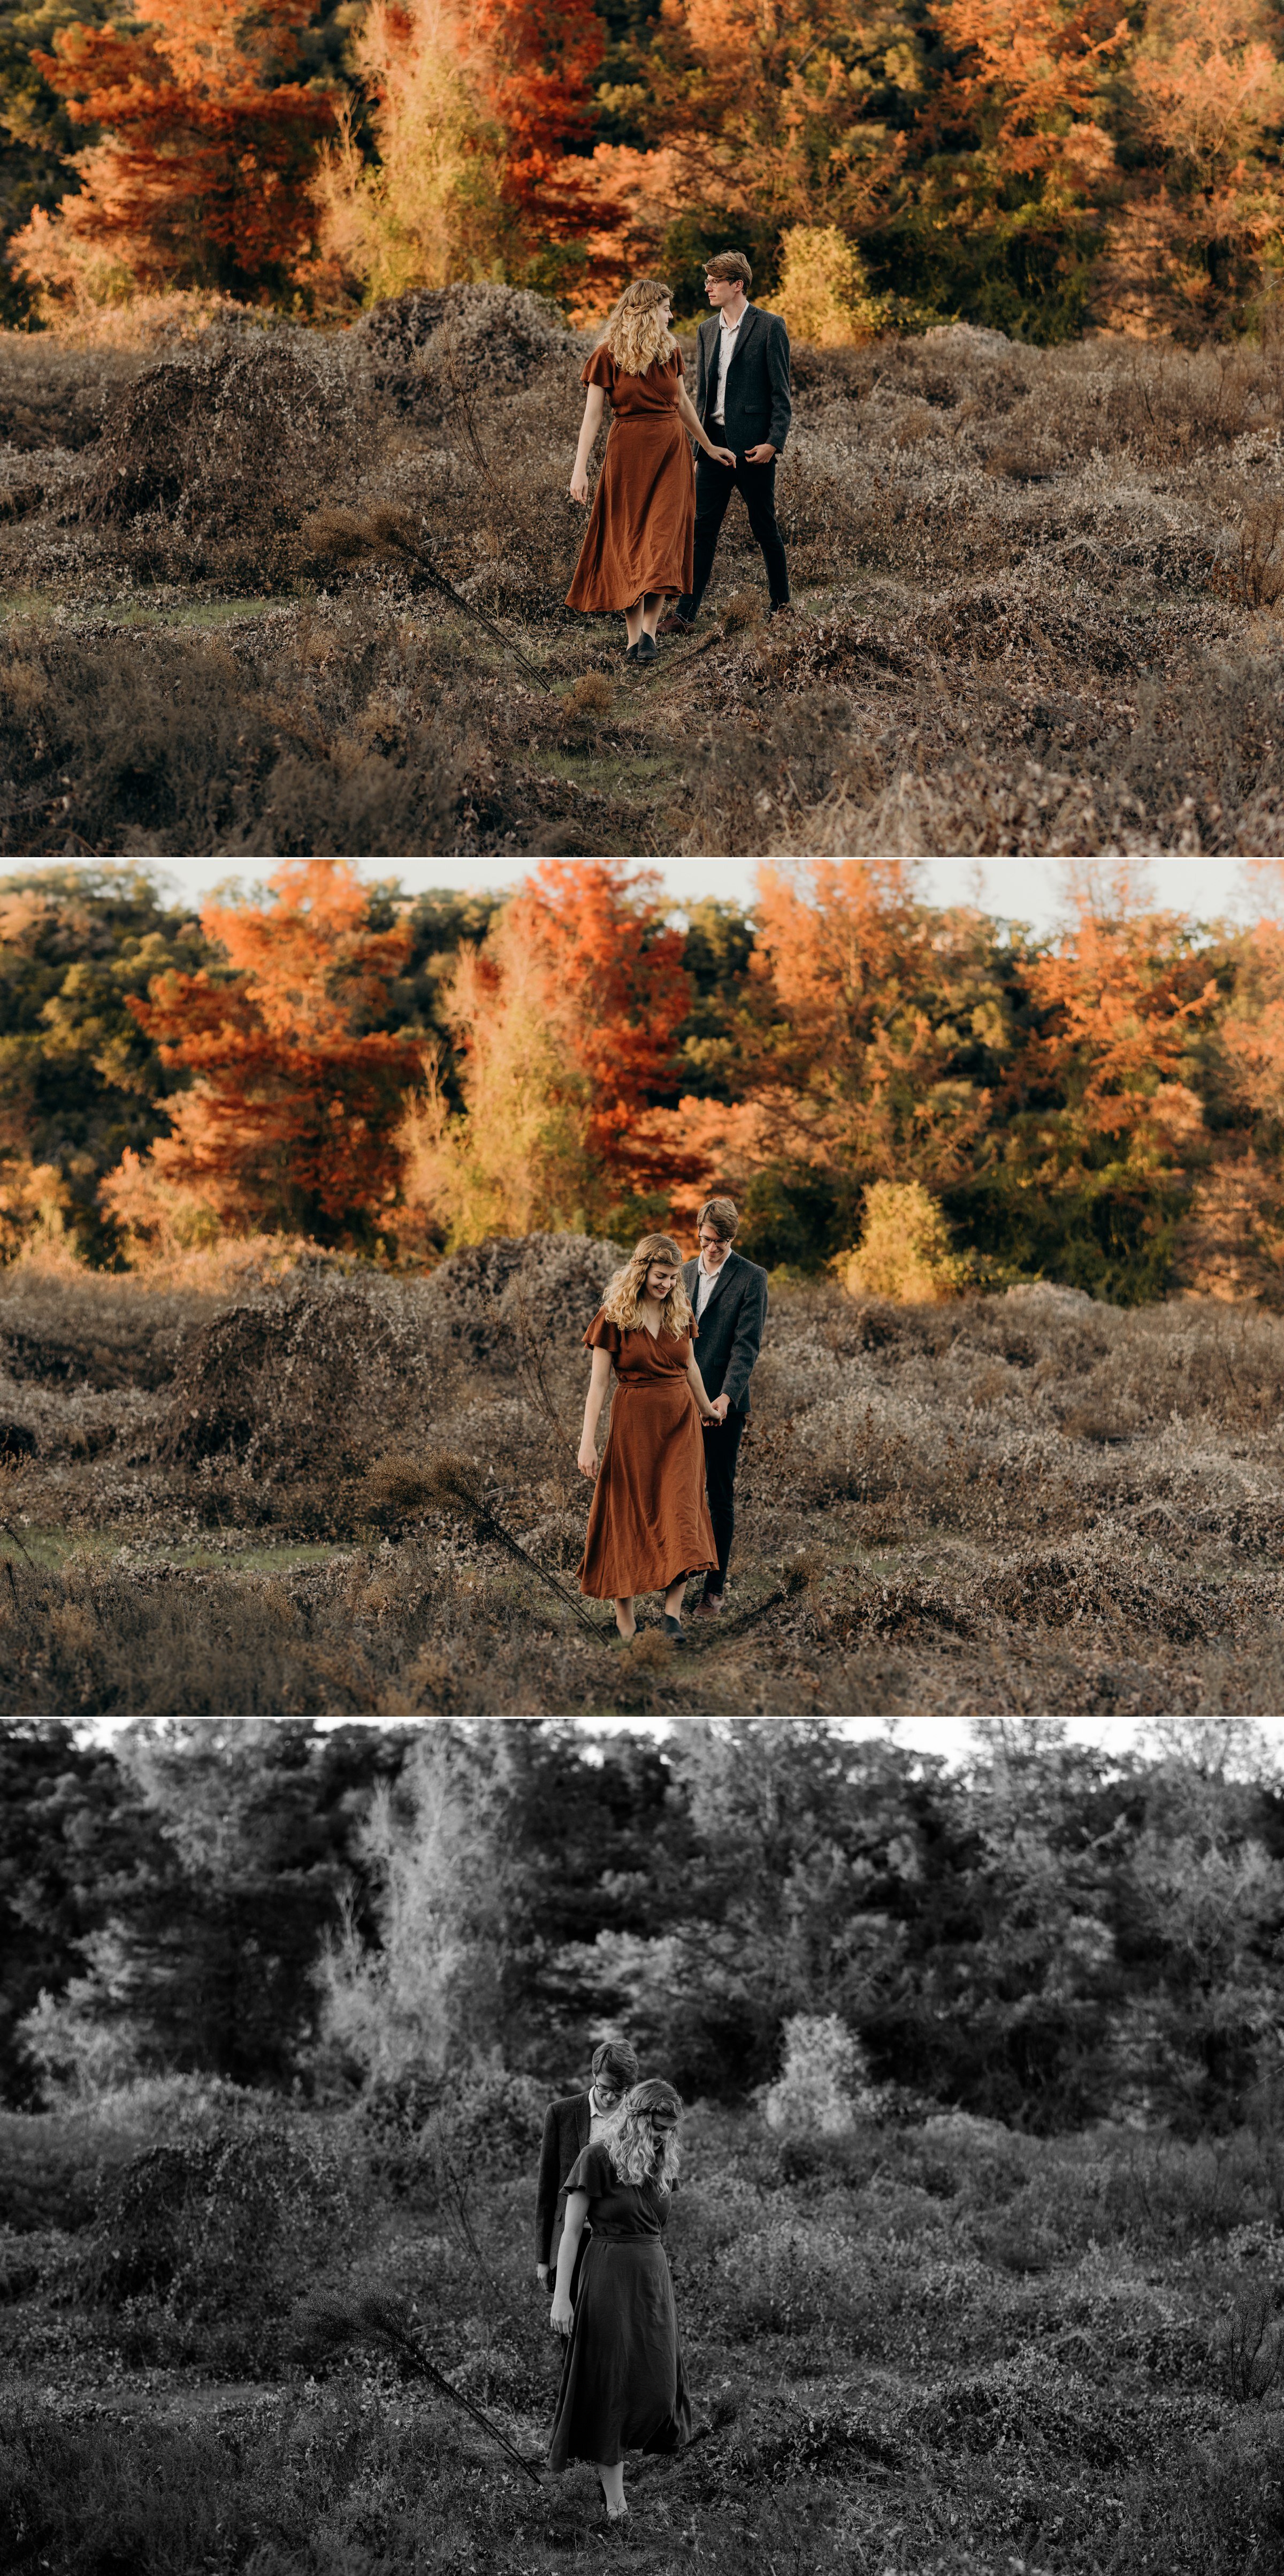  couple in field commons ford ranch park austin texas engagement session wedding elopement photographer 